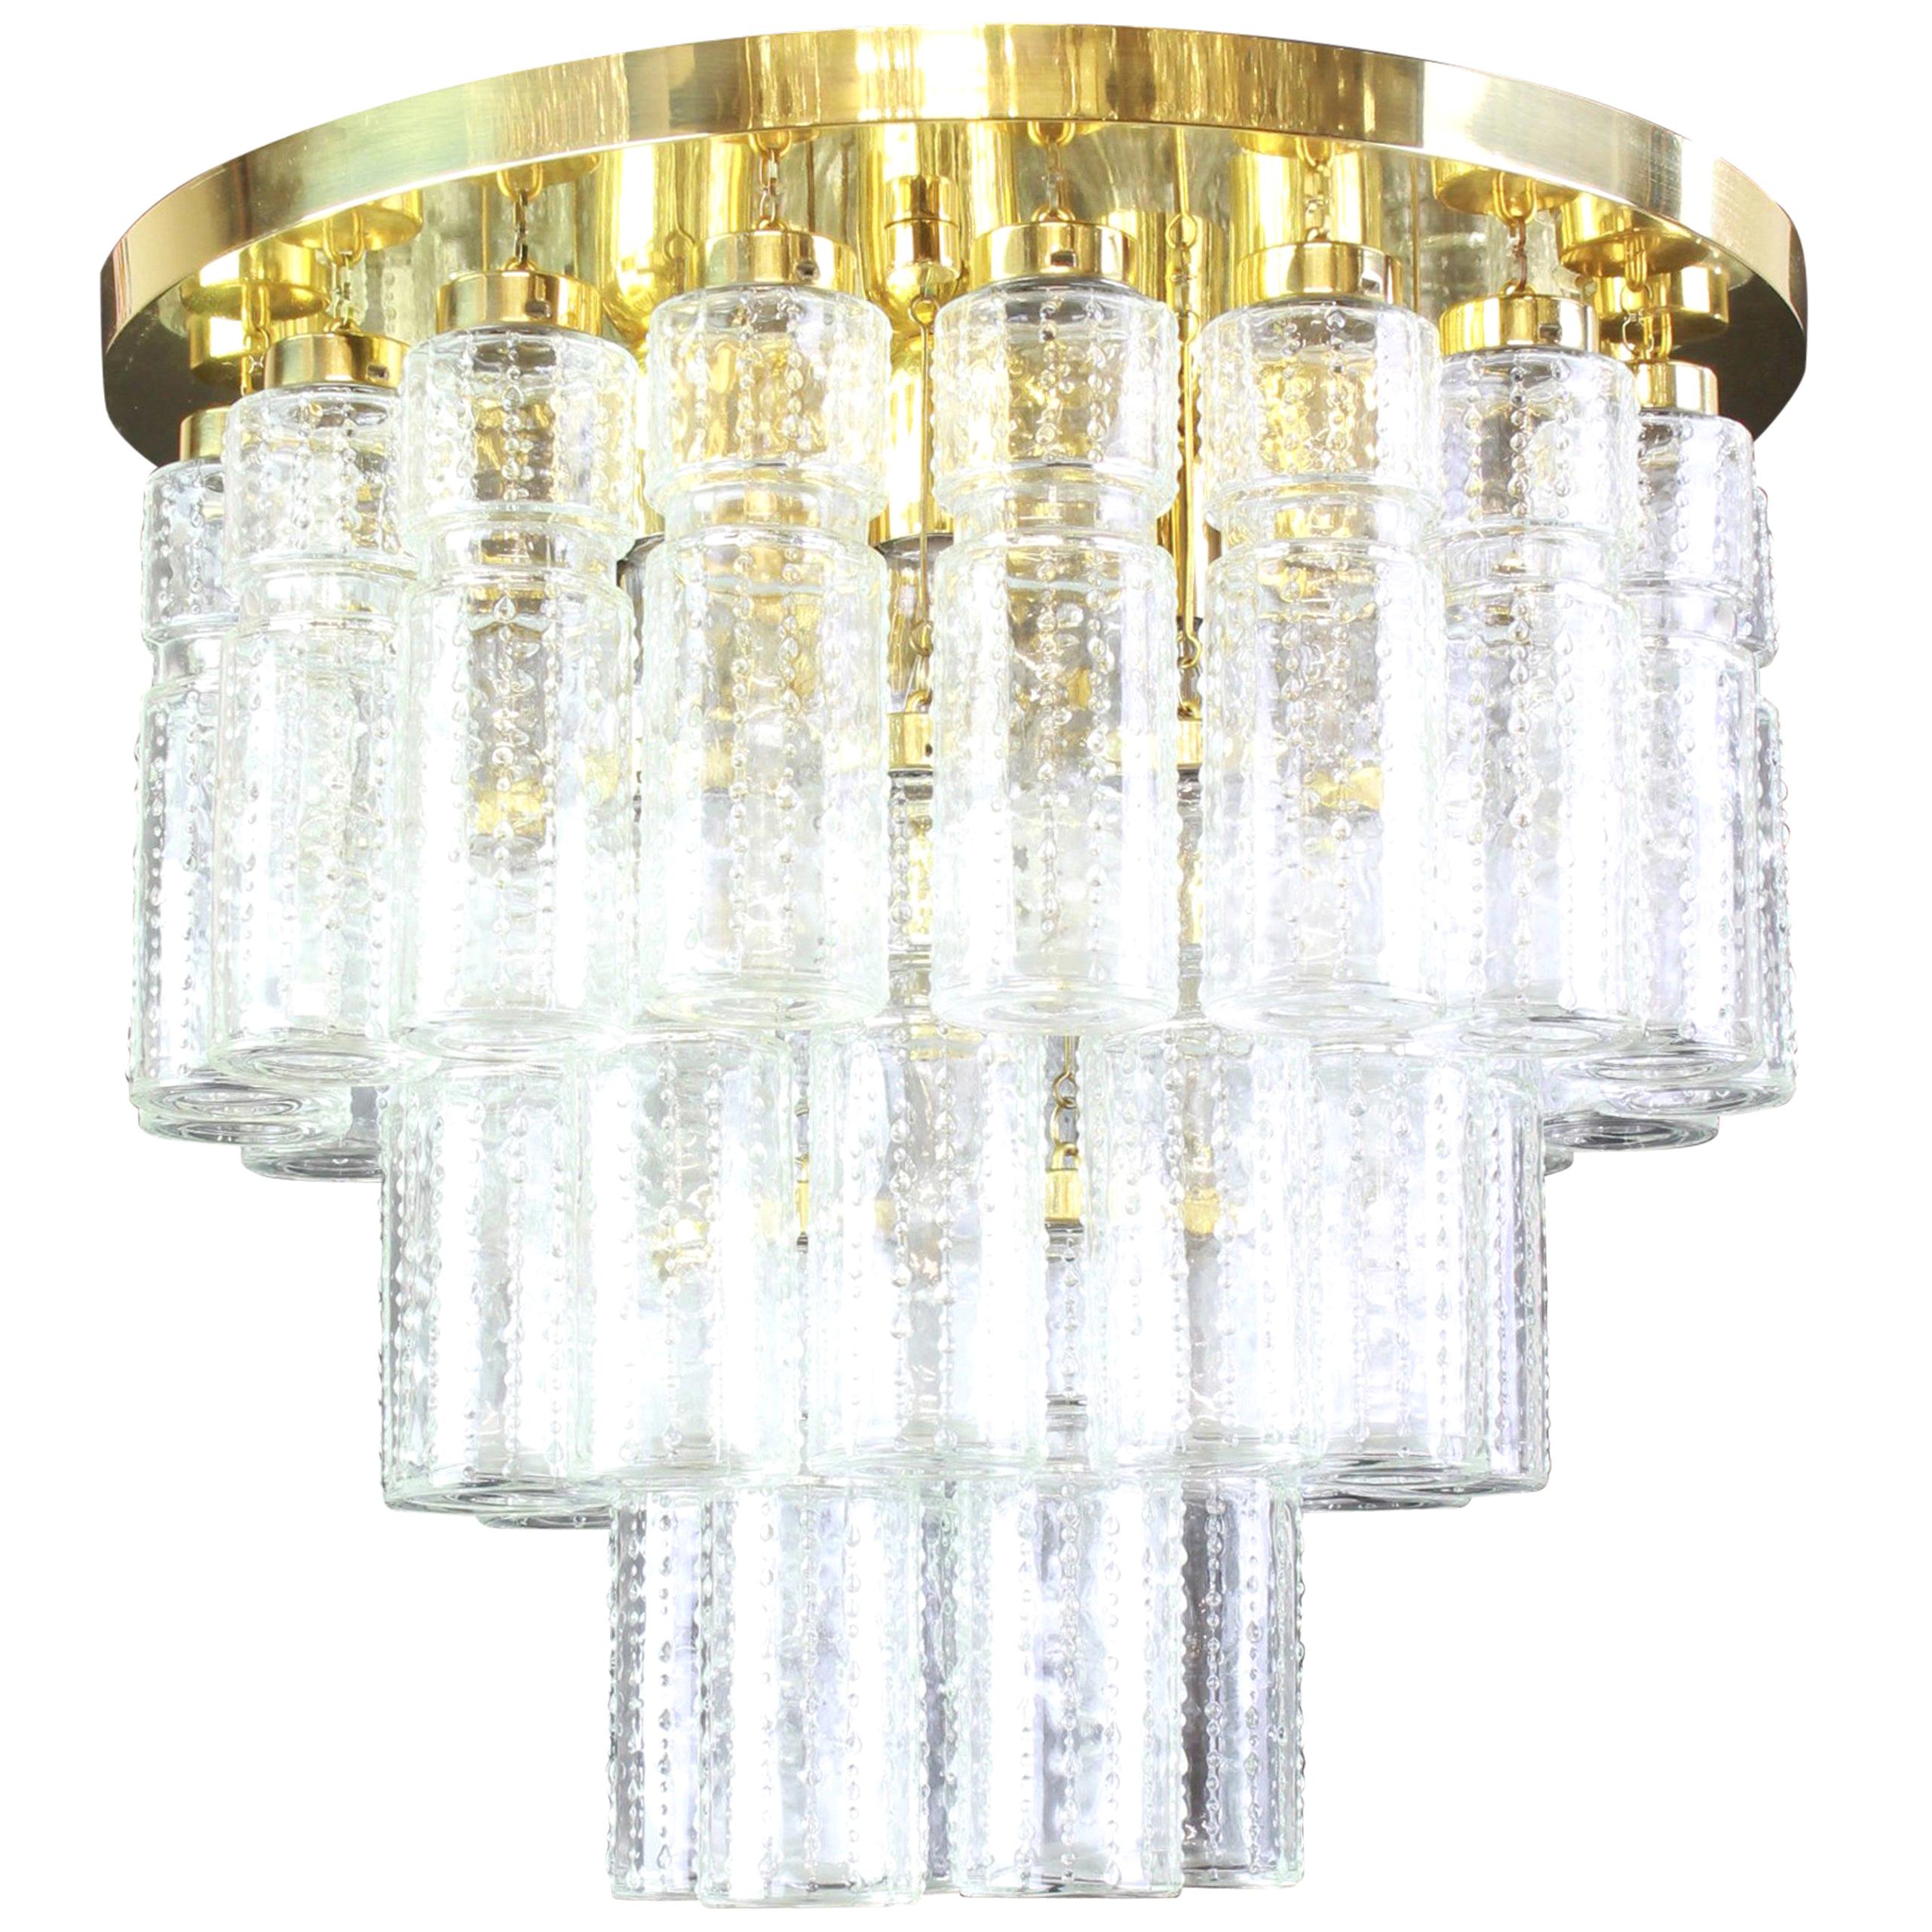 1 of 2 Large Limburg Glass Chandelier, Germany, 1960s For Sale